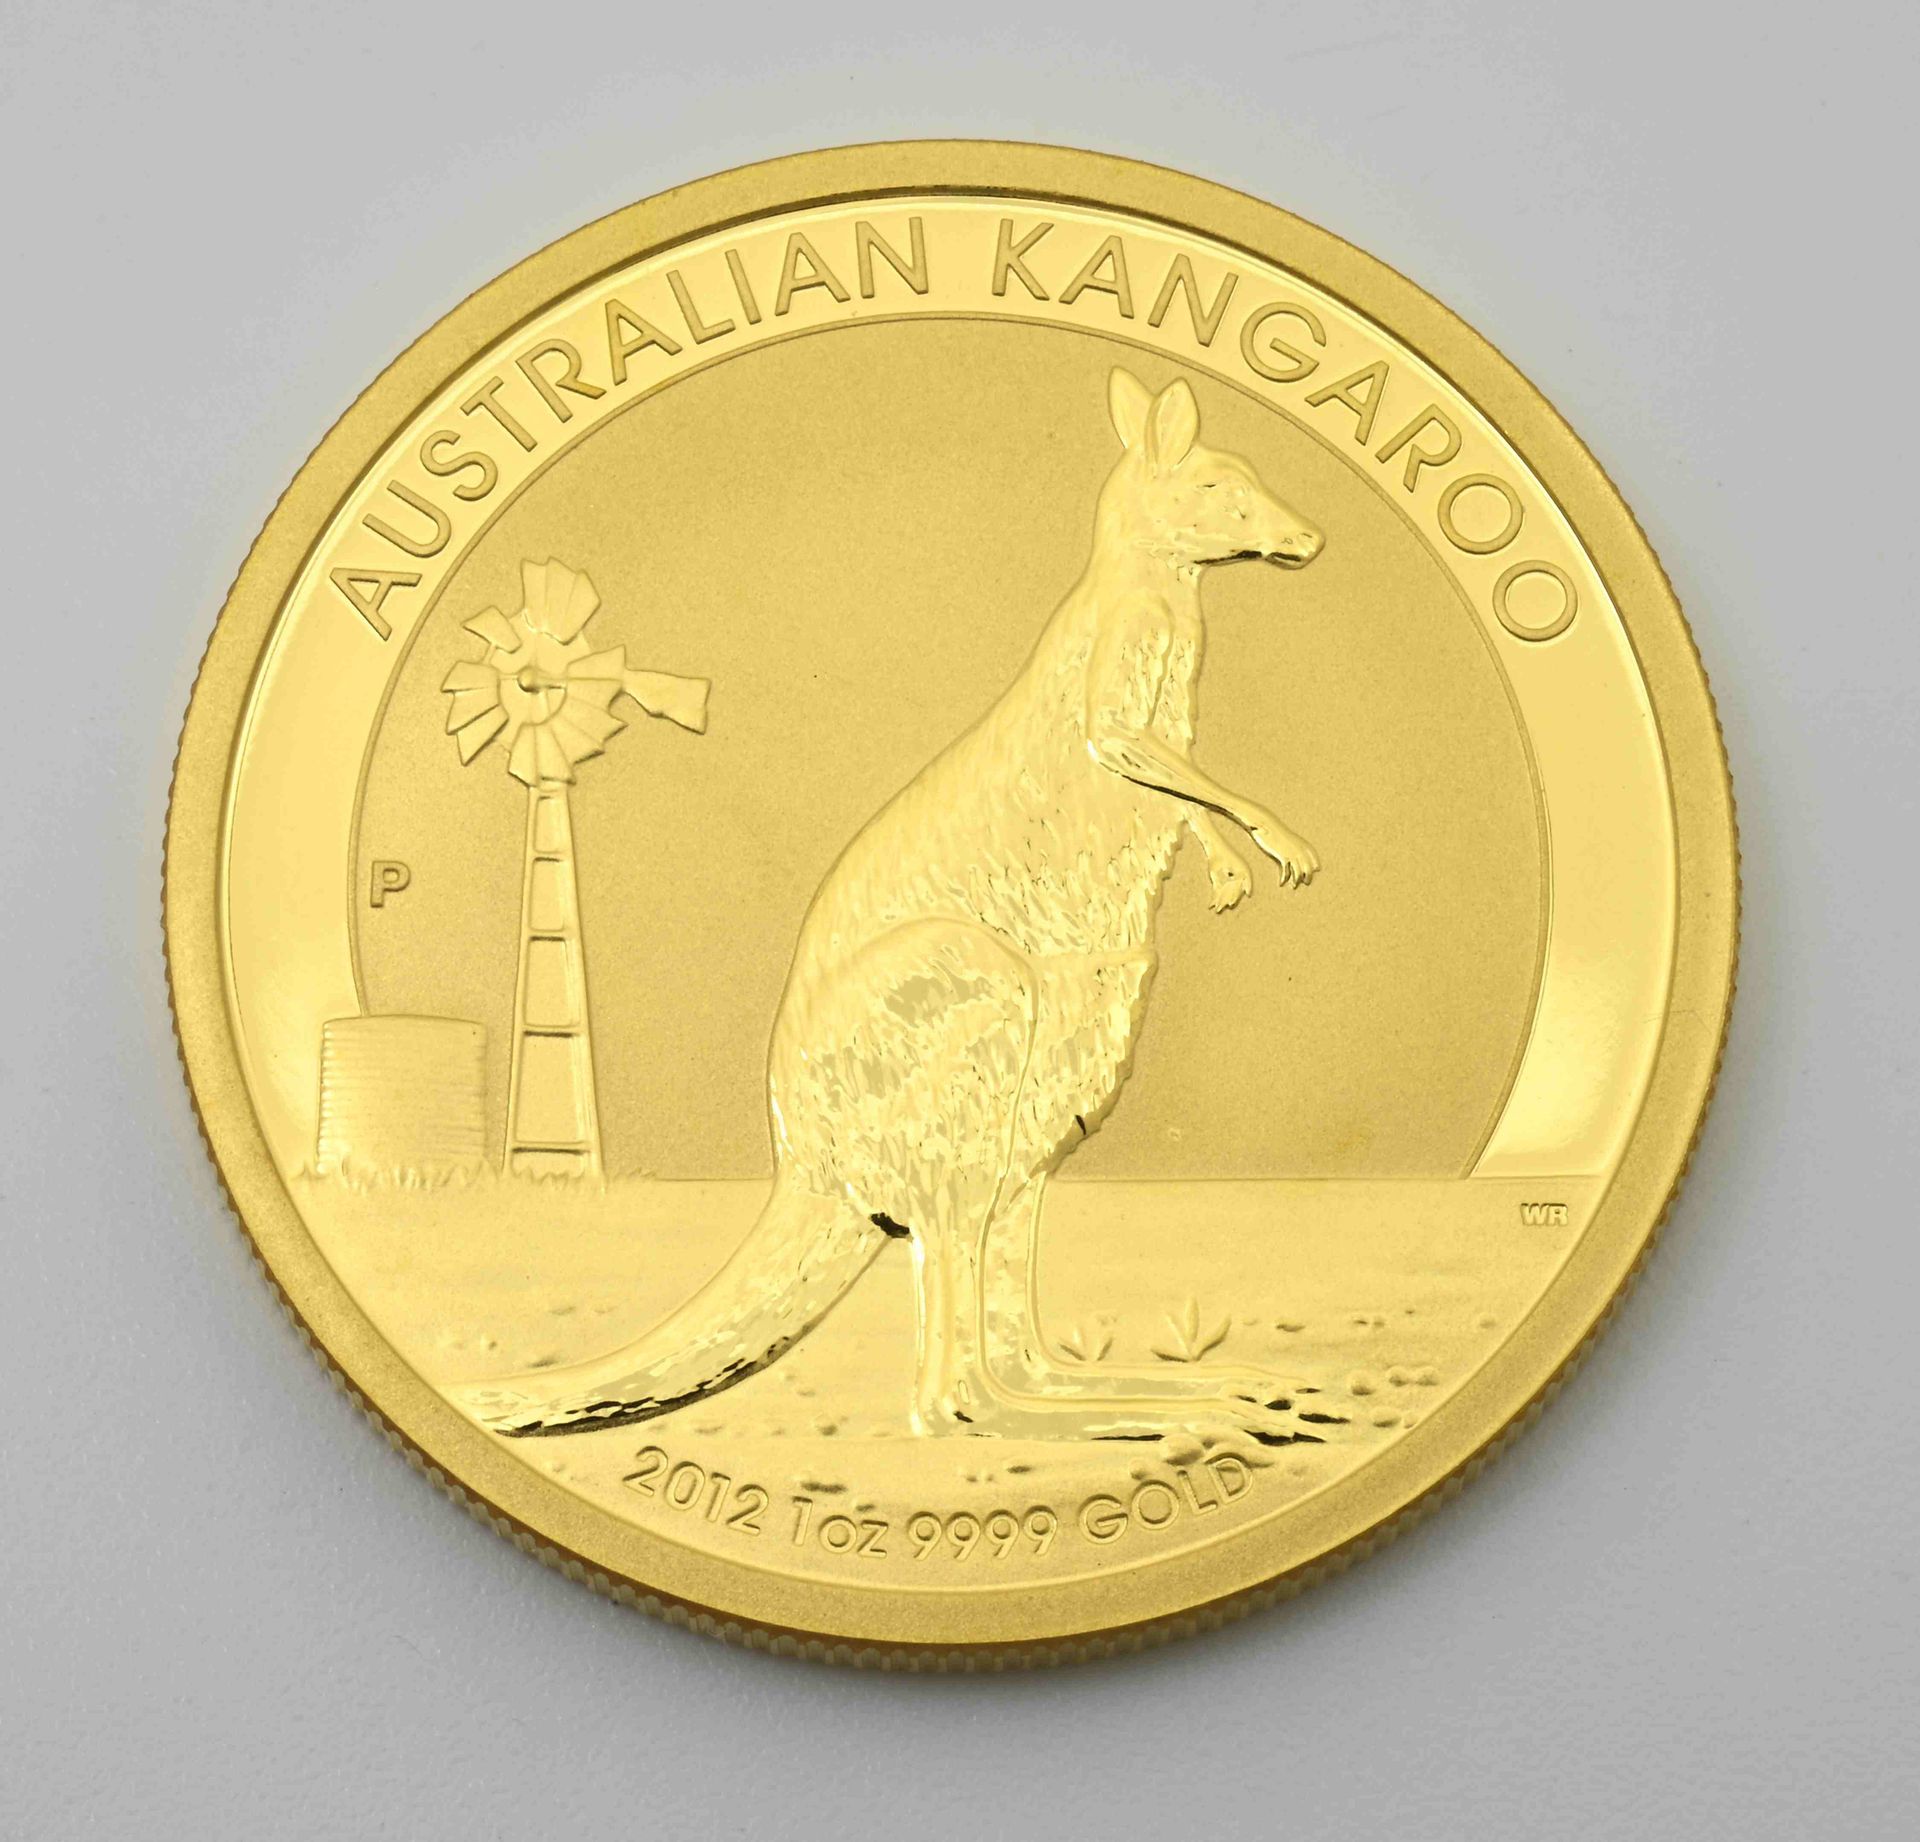 Null Australian Nugget. Perth Australia $100 coin,
one ounce of 9999 fine gold, &hellip;